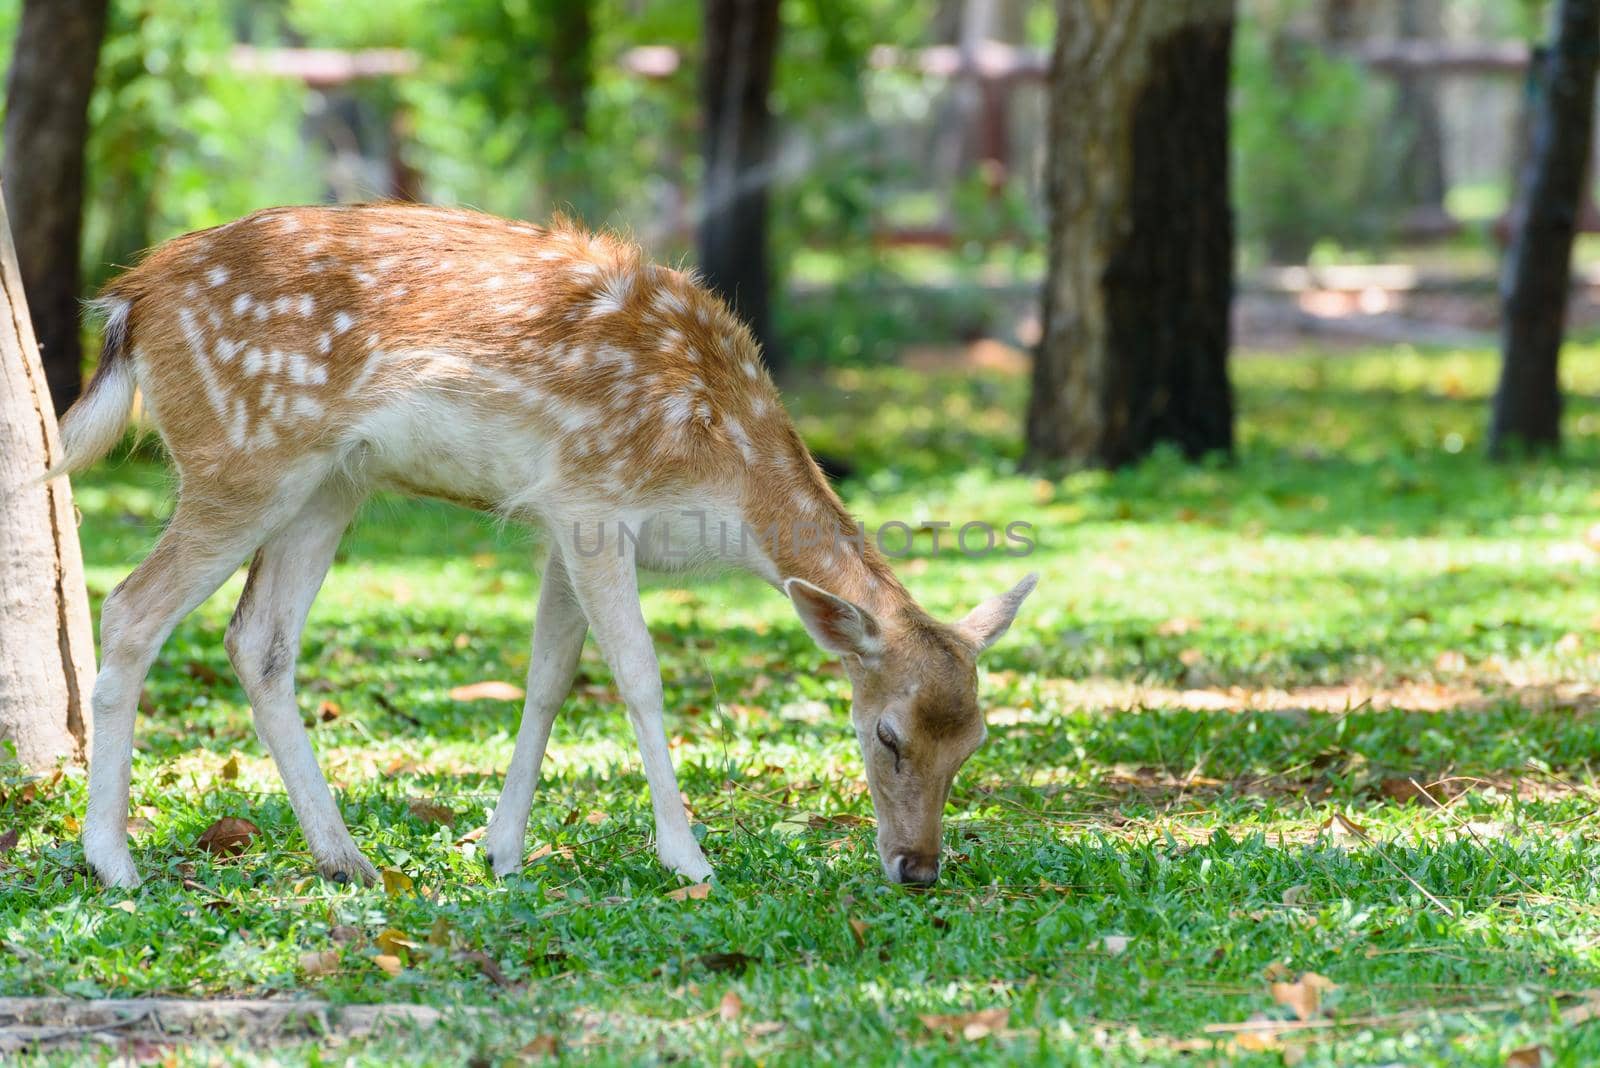 Fallow Deer in the garden at the zoo in Thailand by Yongkiet